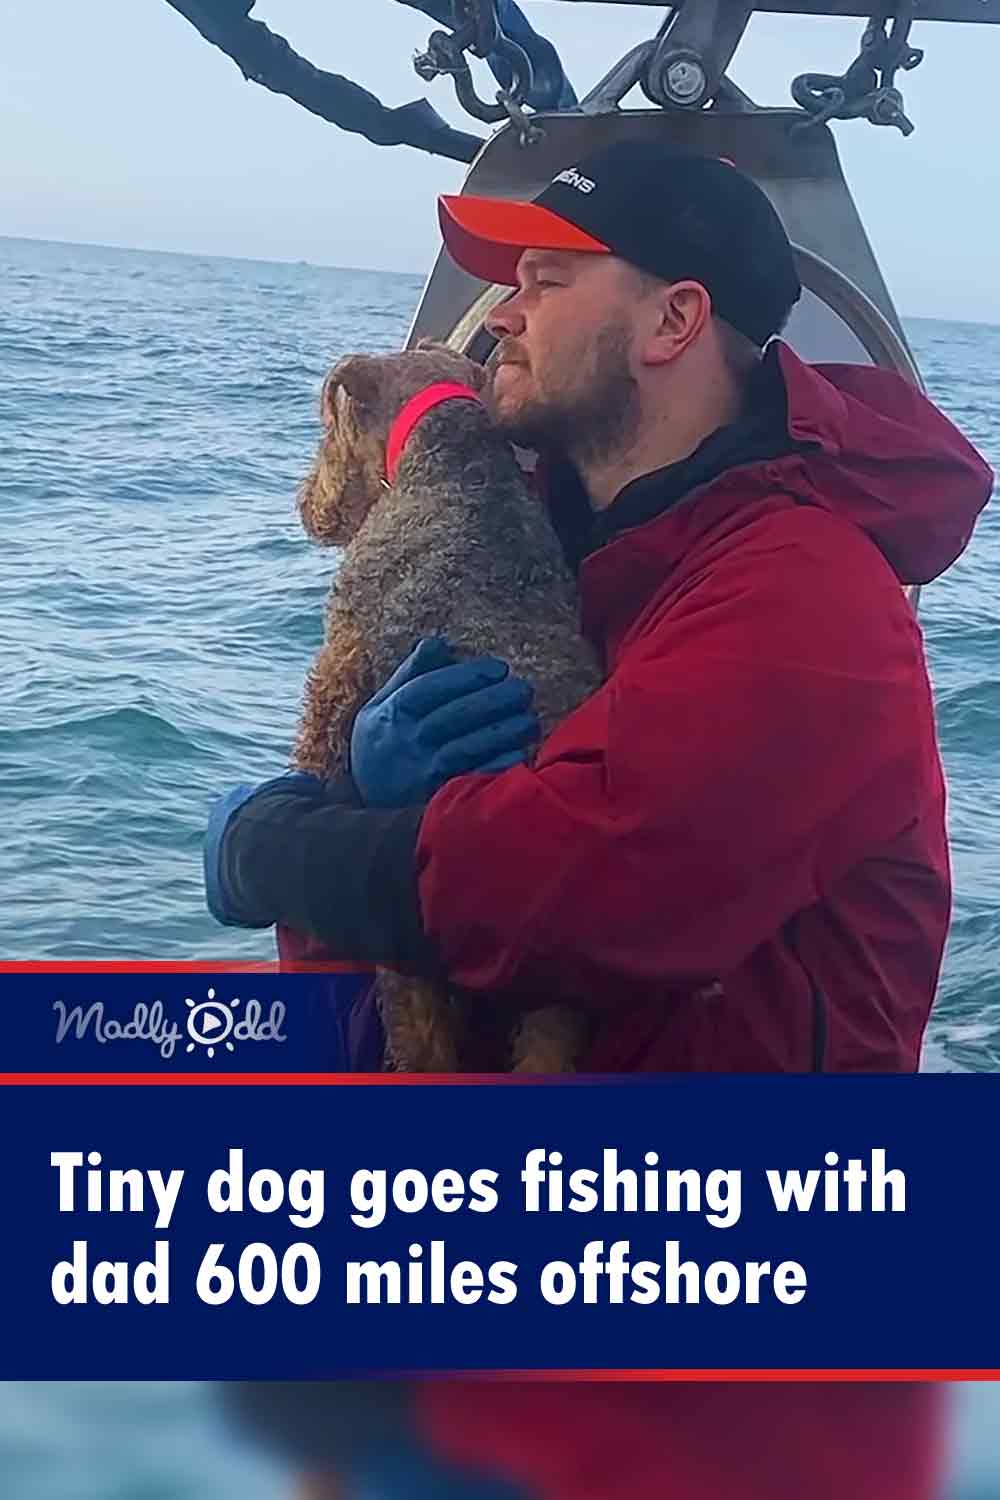 Tiny dog goes fishing with dad 600 miles offshore